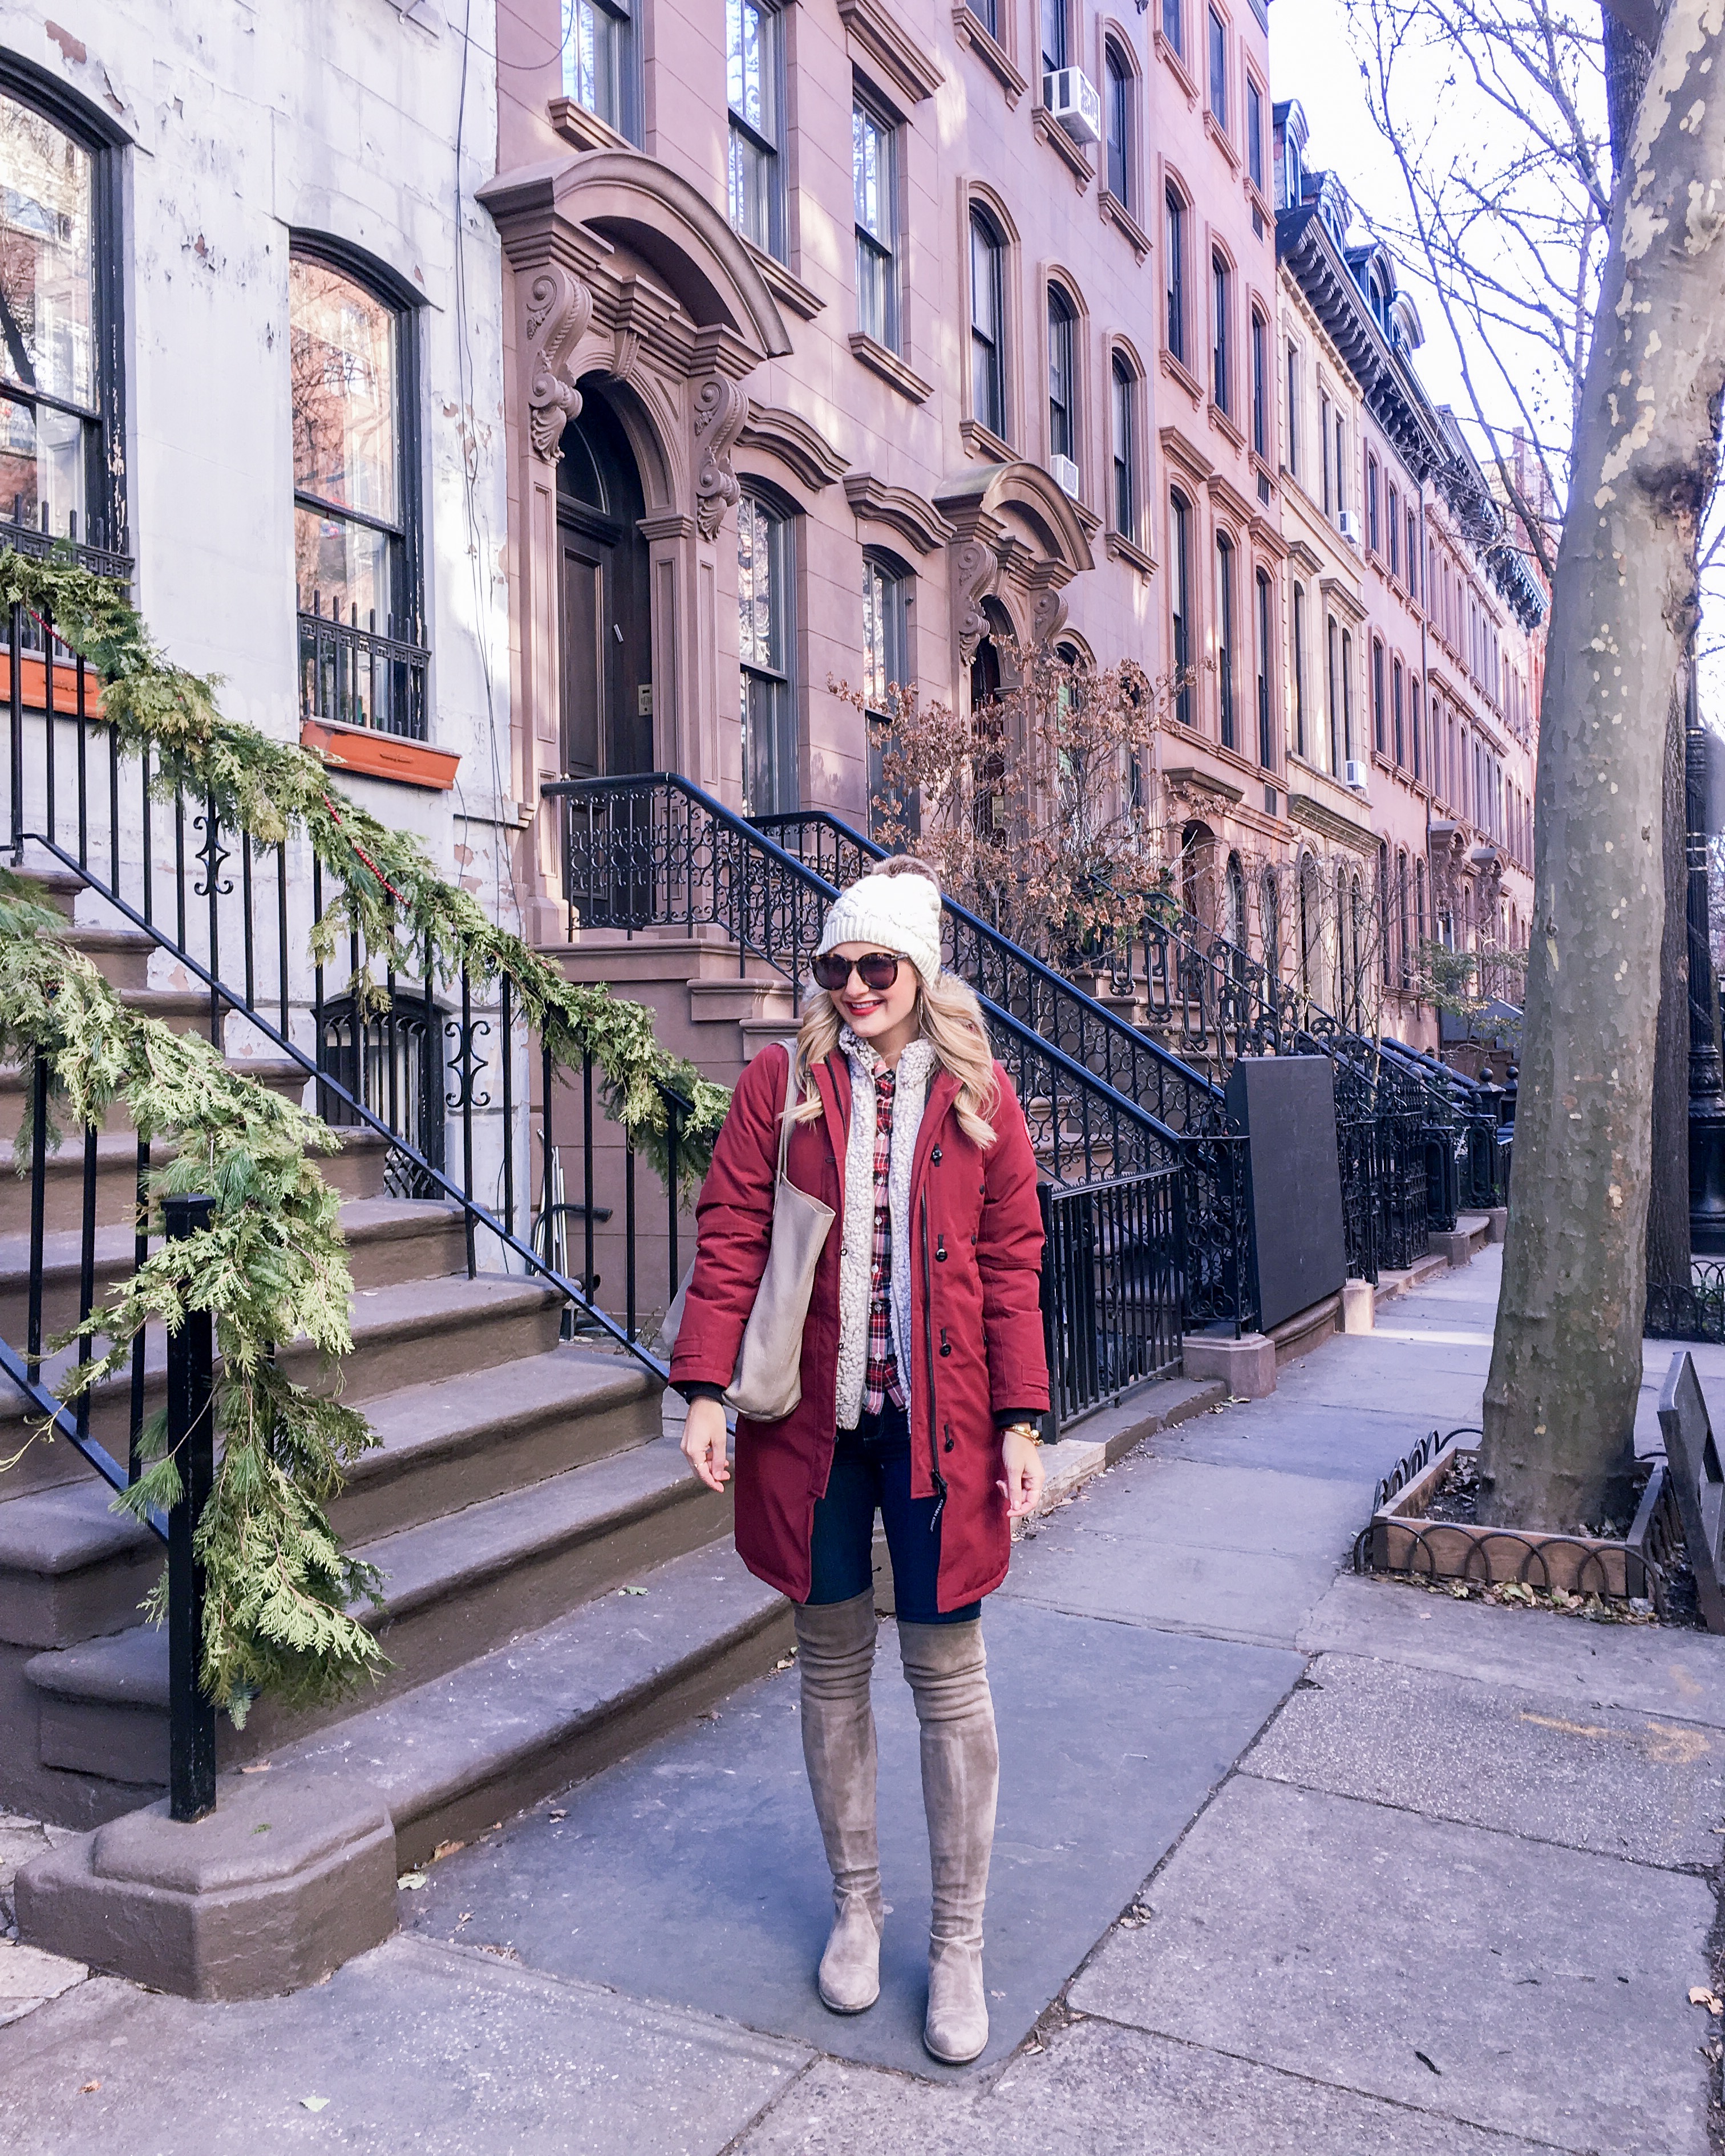 carrie bradshaw's apartment in new york city - A Weekend In New York by popular Chicago travel blogger Visions of Vogue